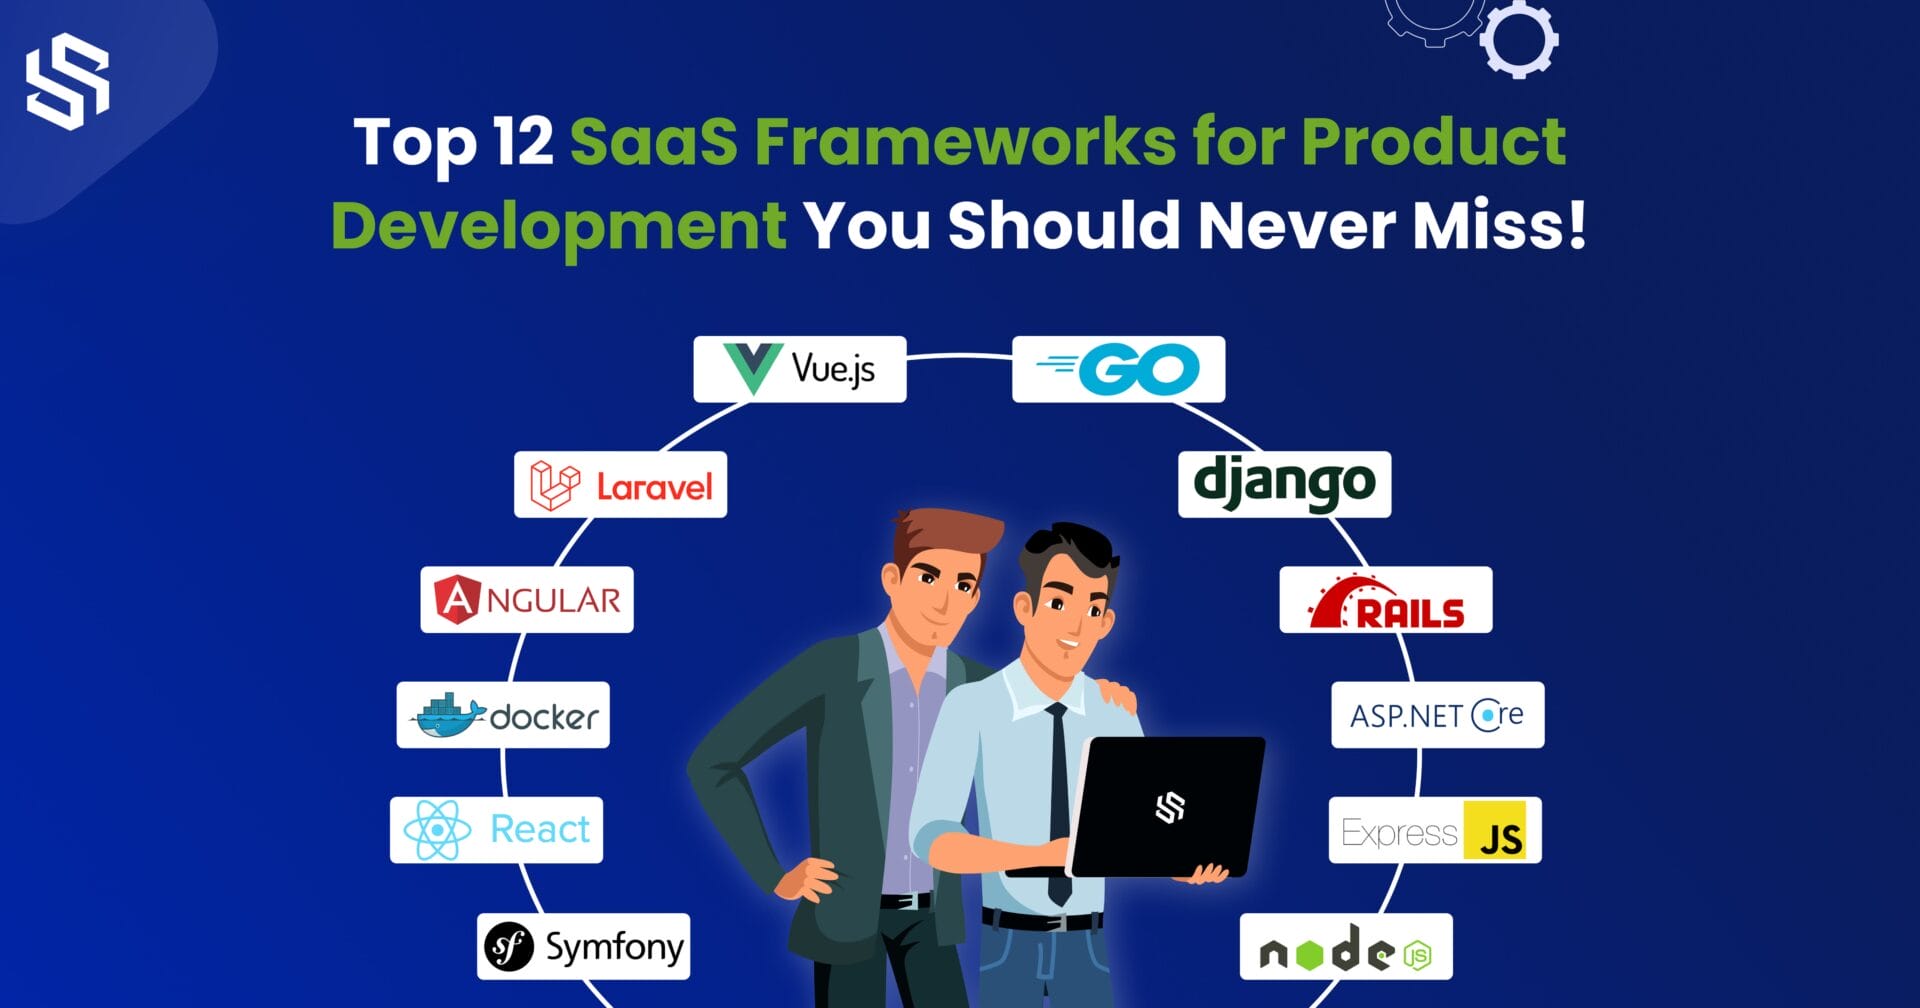 Top 12 SaaS Frameworks for Product Development You Should Never Miss!